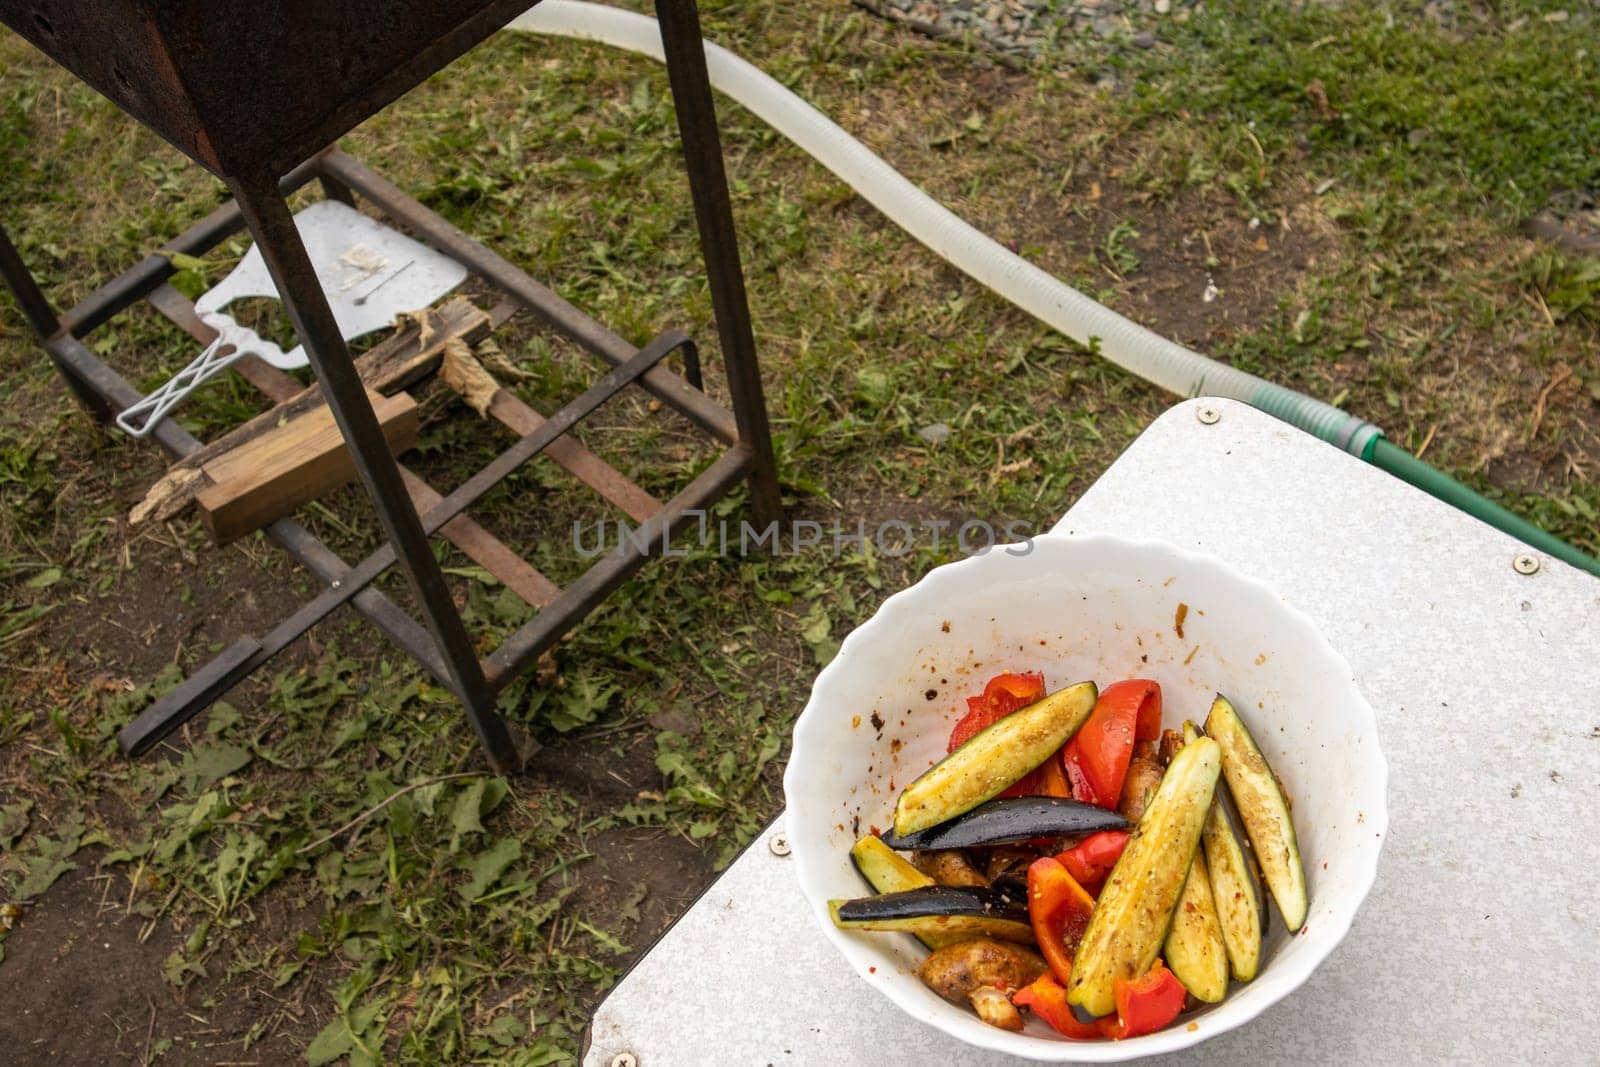 Delicious sliced grilled vegetables. Rustic background lawn and barbecue.